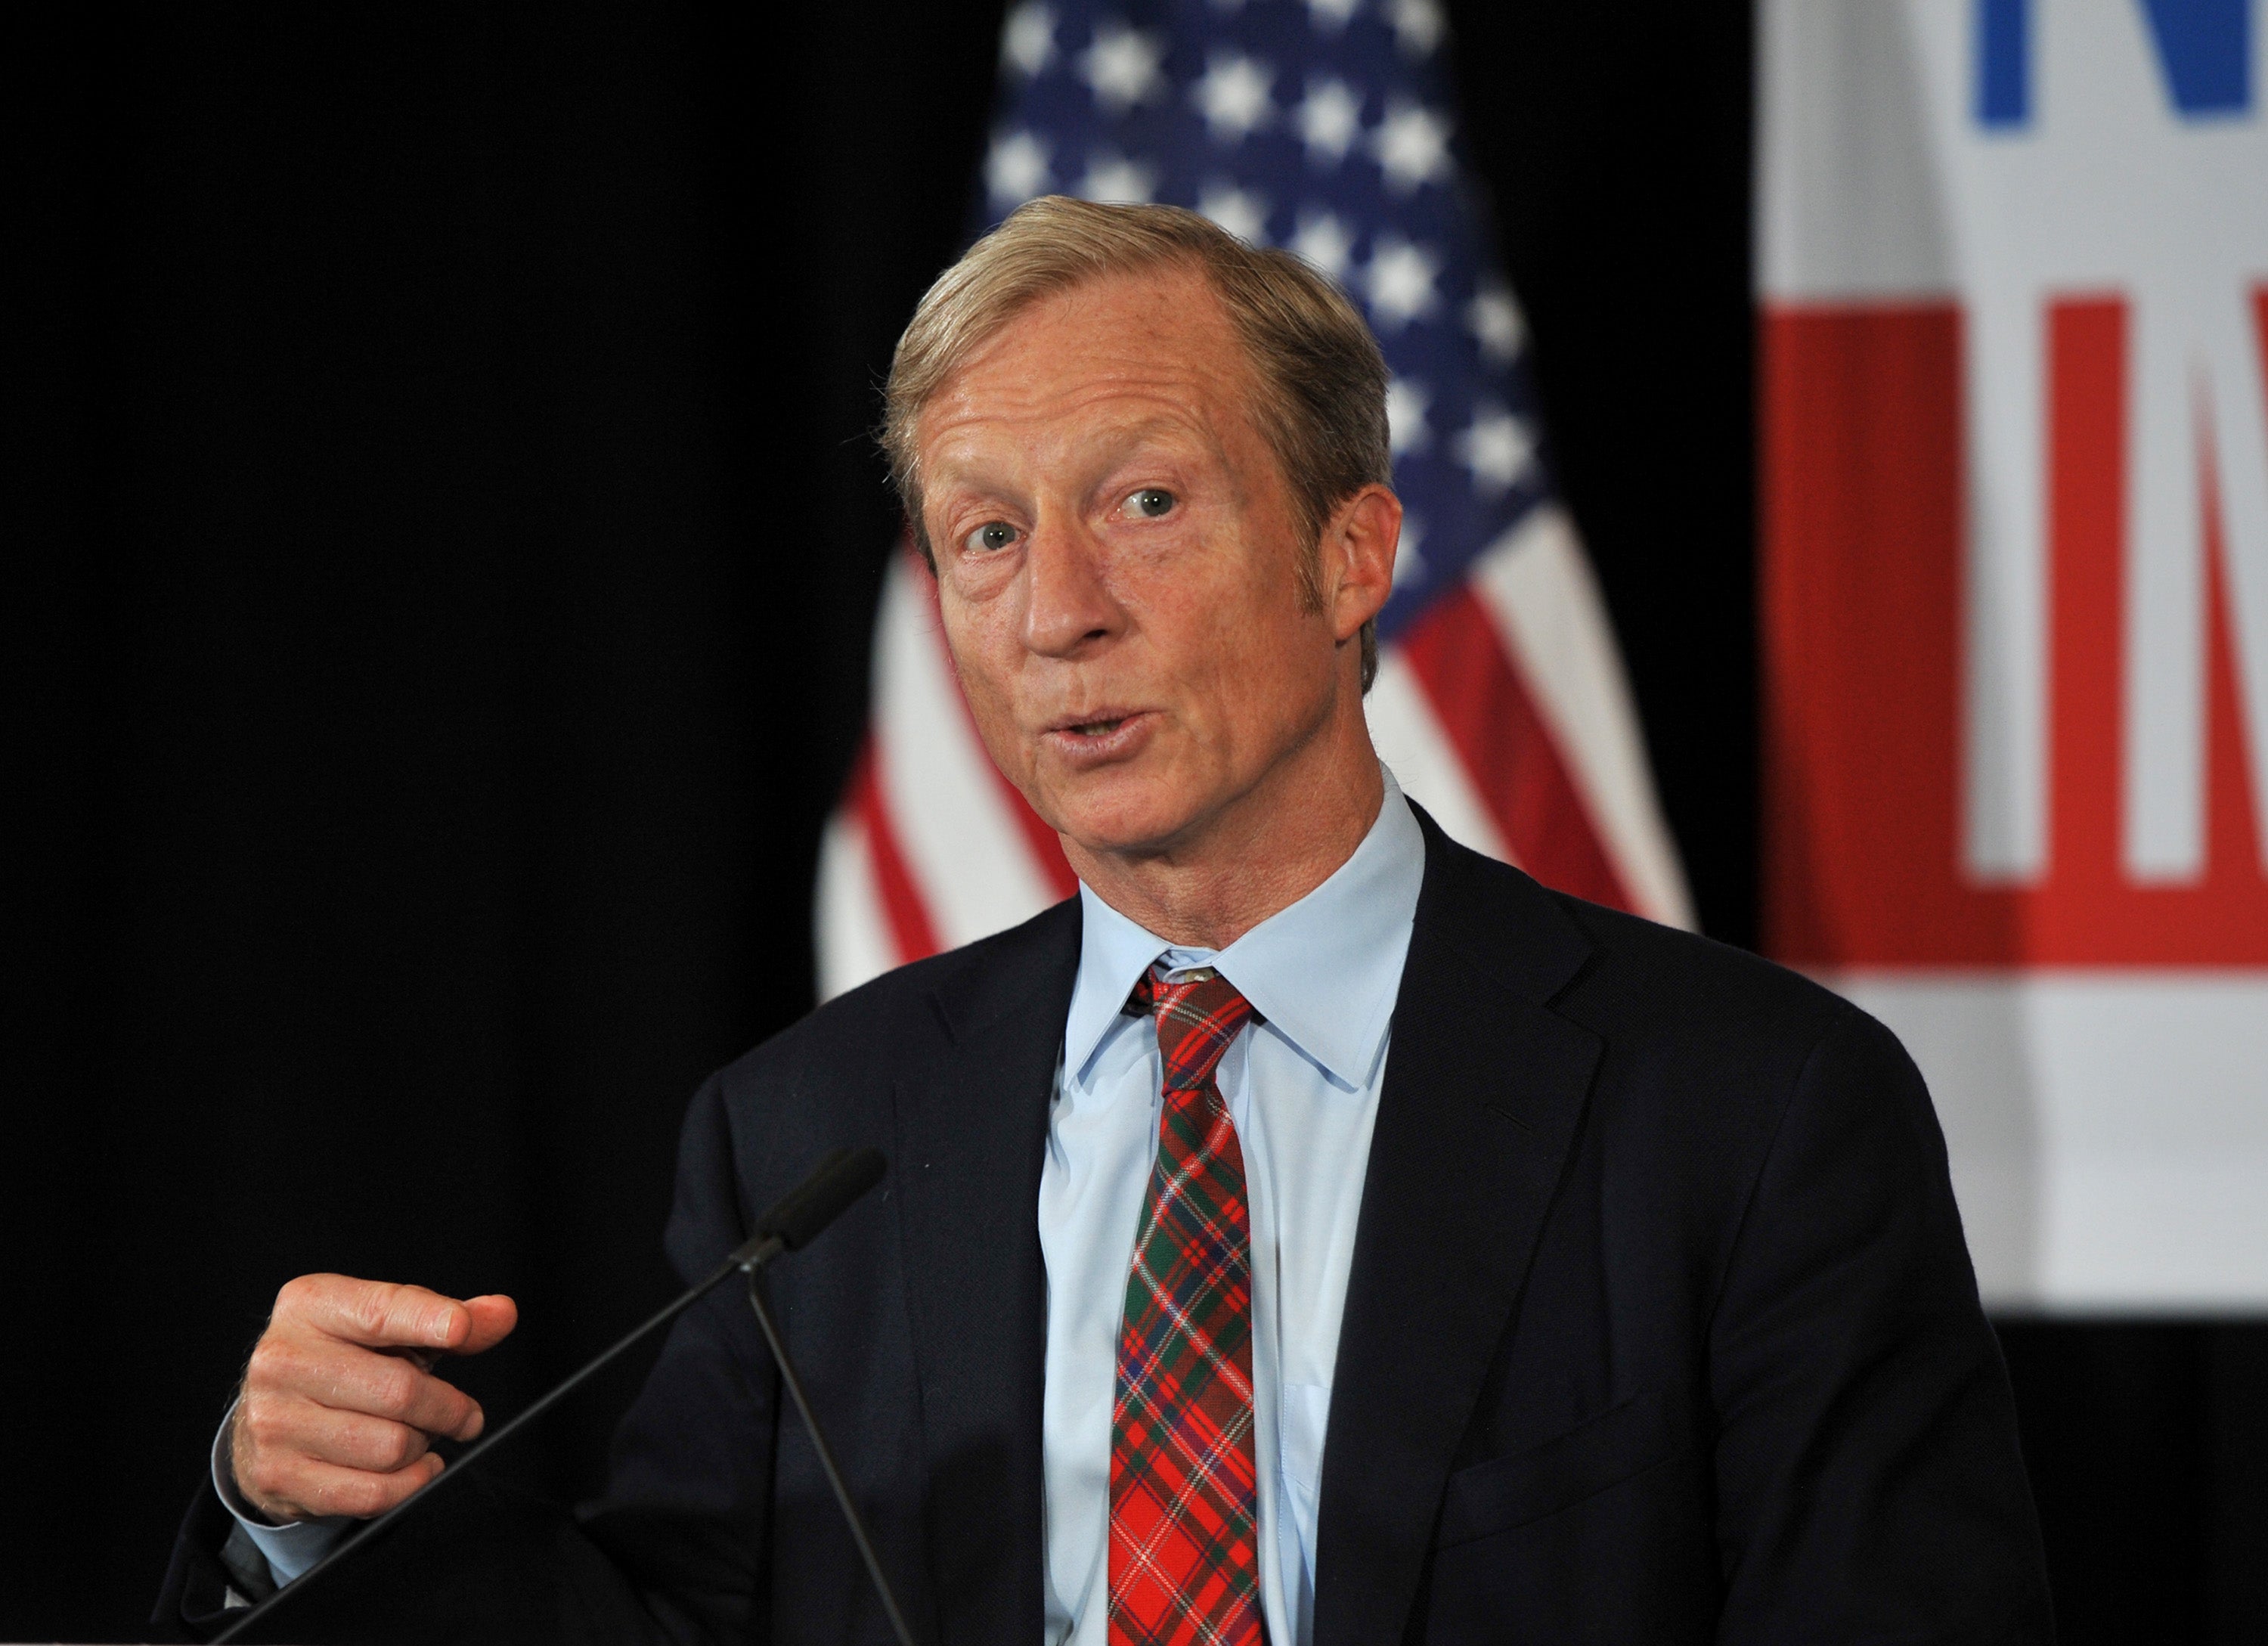 Billionaire Tom Steyer Said He Wouldn’t Run For President, Now He’s The 24th Democratic Candidate